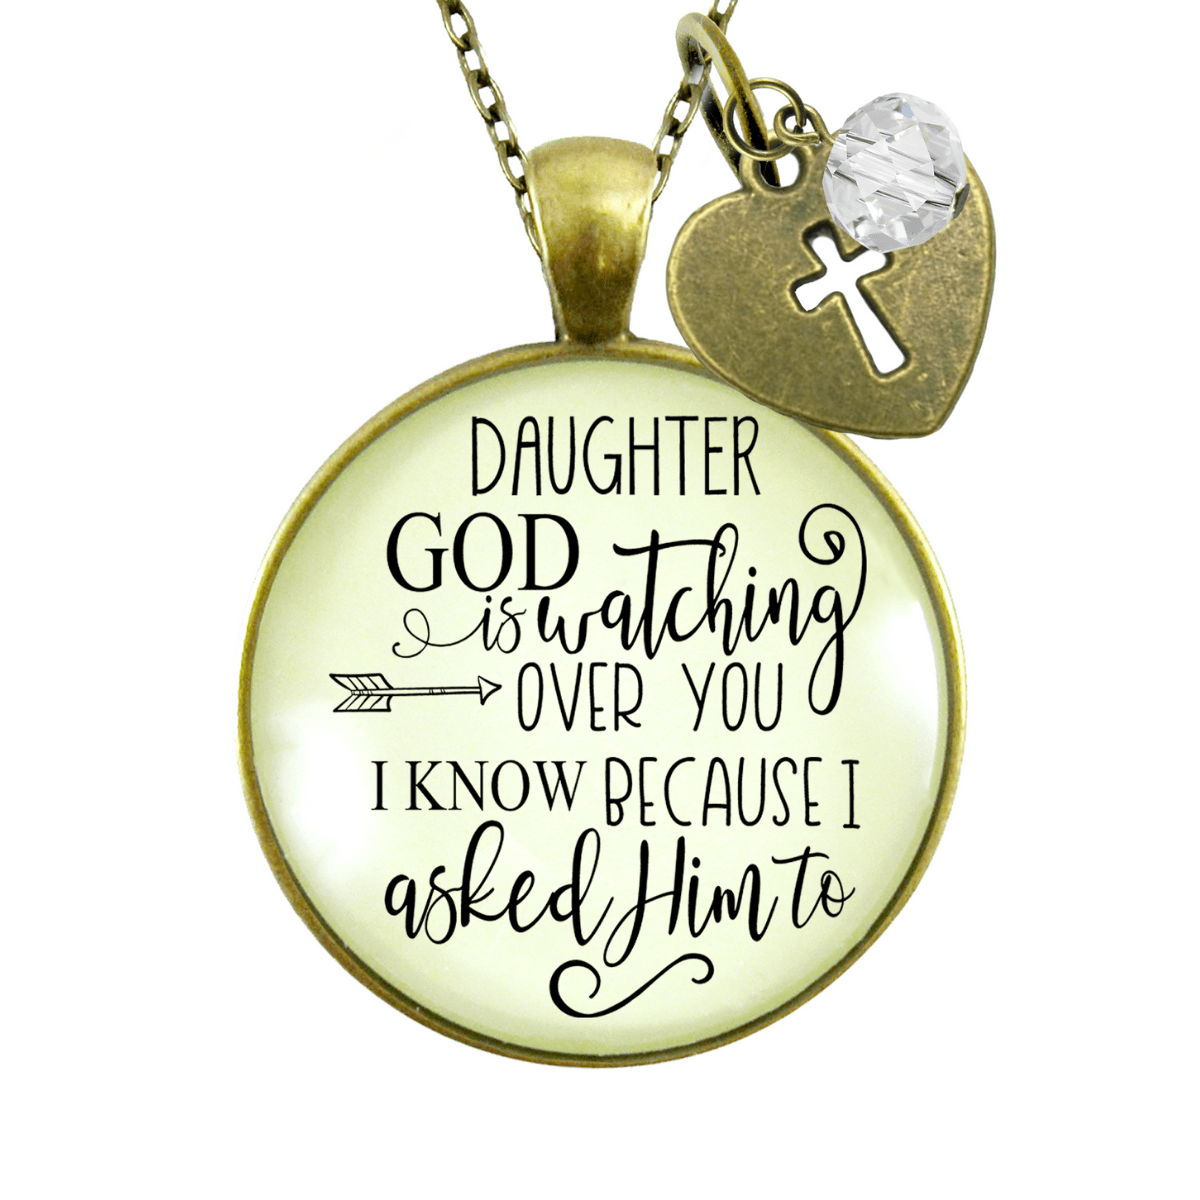 Gutsy Goodness To Daughter Necklace He is Watching Over You Love From Mom Jewelry Gift - Gutsy Goodness Handmade Jewelry;To Daughter Necklace He Is Watching Over You Love From Mom Jewelry Gift - Gutsy Goodness Handmade Jewelry Gifts